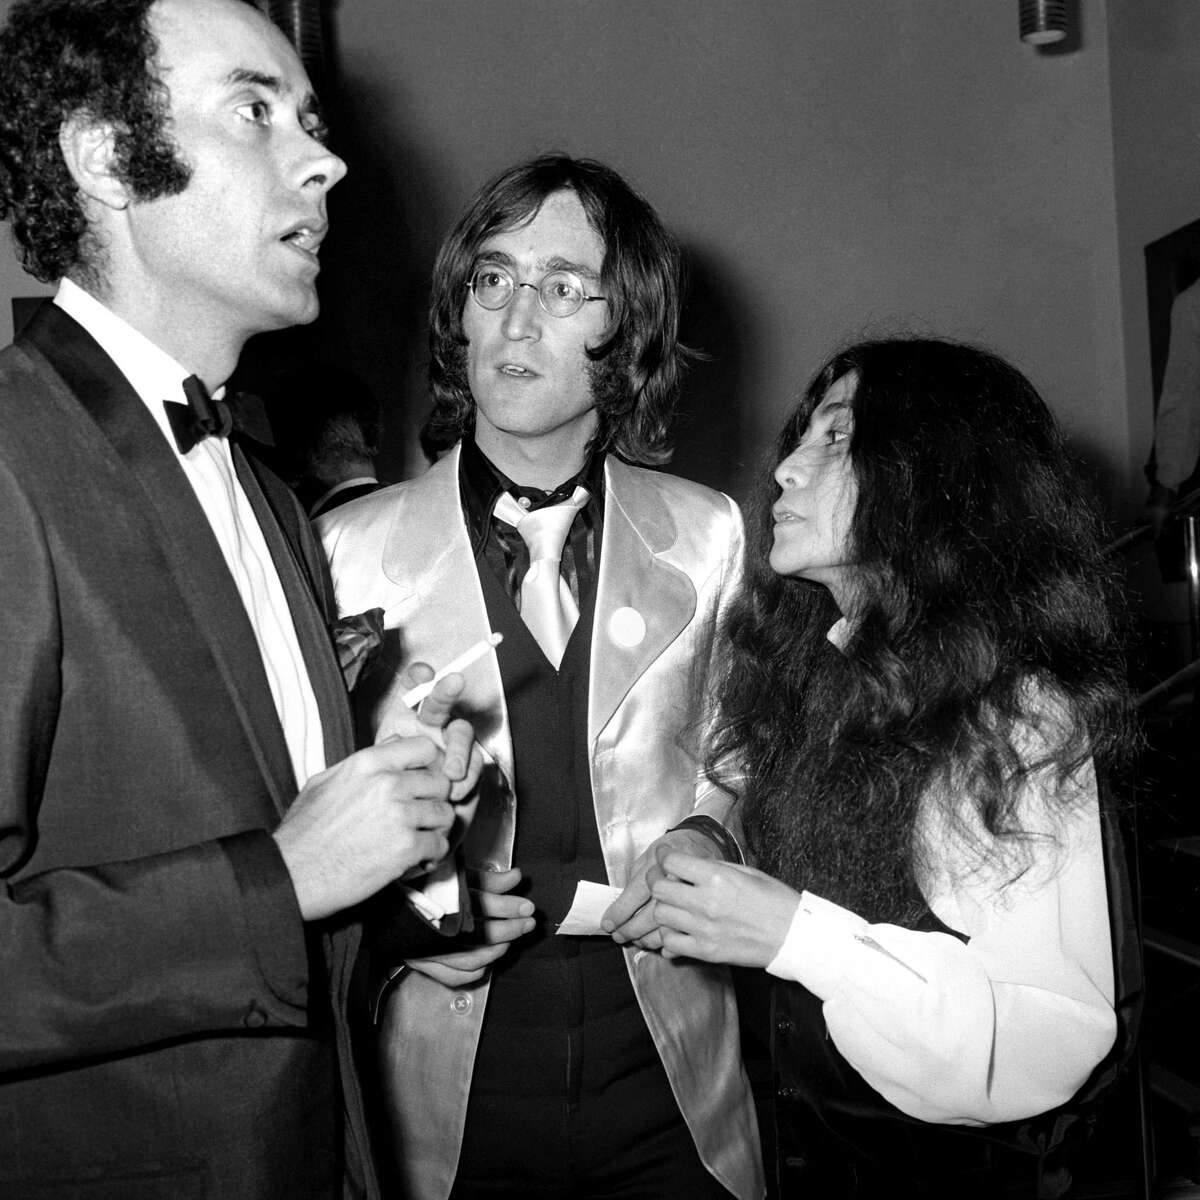 In this file photo of June 18, 1968 Victor Spinetti talks with John Lennon and Yoko Ono in London. Victor Spinetti, a comic actor who appeared in three Beatles movies and won a Tony on Broadway, has died, his agent said Tuesday June 19, 2012. He was 82. Spinetti died Tuesday morning June 19, 2012 after suffering from cancer for several years, said Barry Burnett, the actor's close friend and agent. Spinetti won a Tony award in 1965 for his Broadway performance in "Oh, What a Lovely War," but became most well-known for his appearances in the Beatles movies "A Hard Day's Night," ''Help," and "Magical Mystery Tour." (AP Photo/ PA Wire)